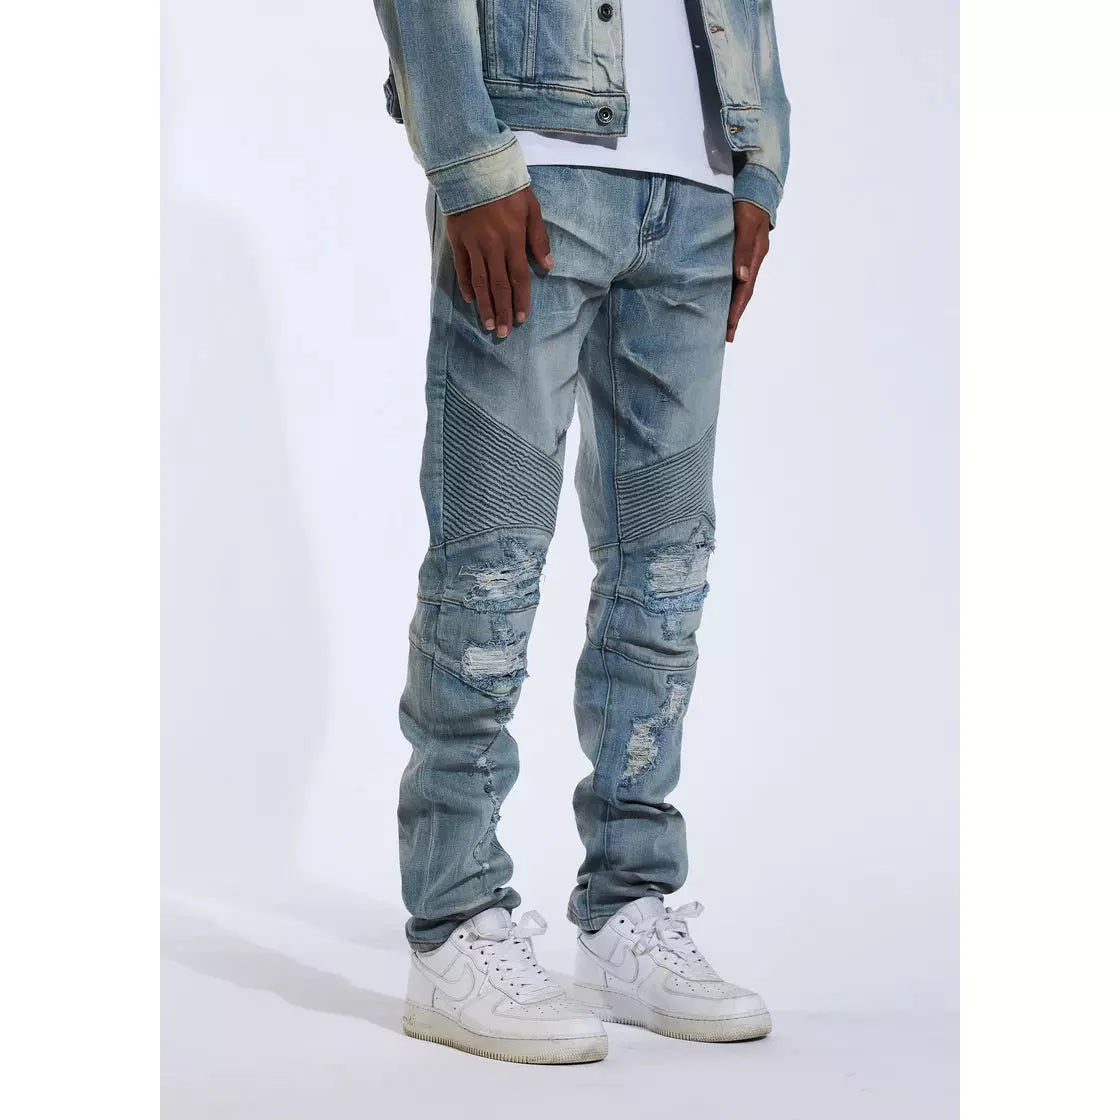 Stocks Clothing Men Jeans Nice Light Blue Color Skinny Fit Wholesale Man Jeans  Moto Biker Jesns Man Stretch Denim Long Trousers High Quality Jeans Man -  China Moto Men's Jeans and New